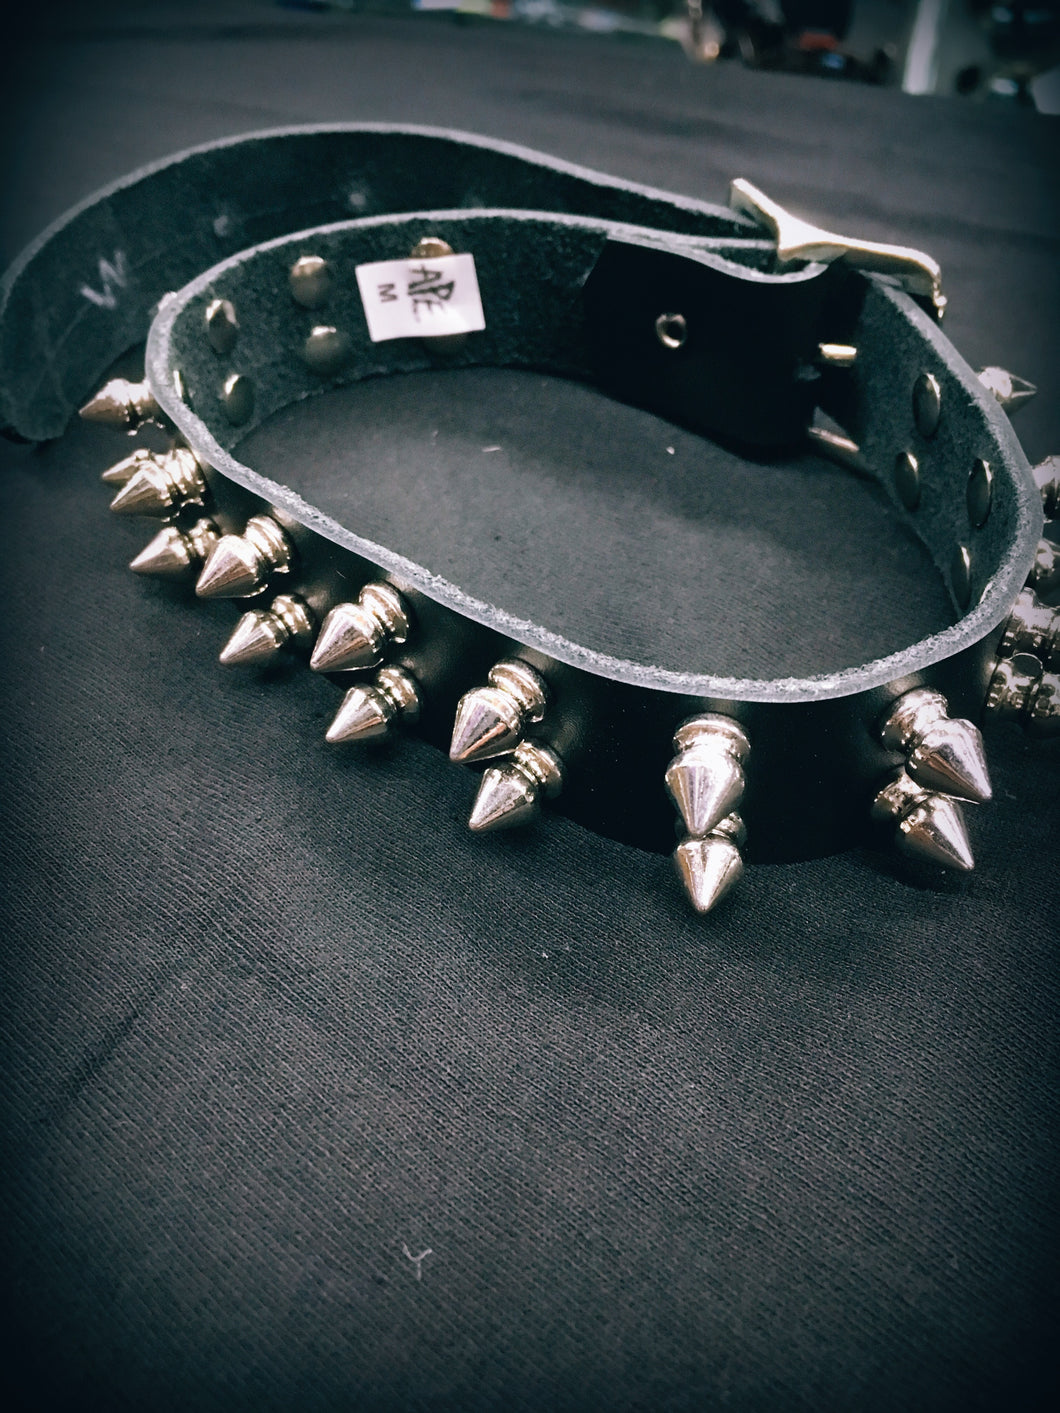 black leather collar with two rows of multiple silver tree spikes. shows belt closure